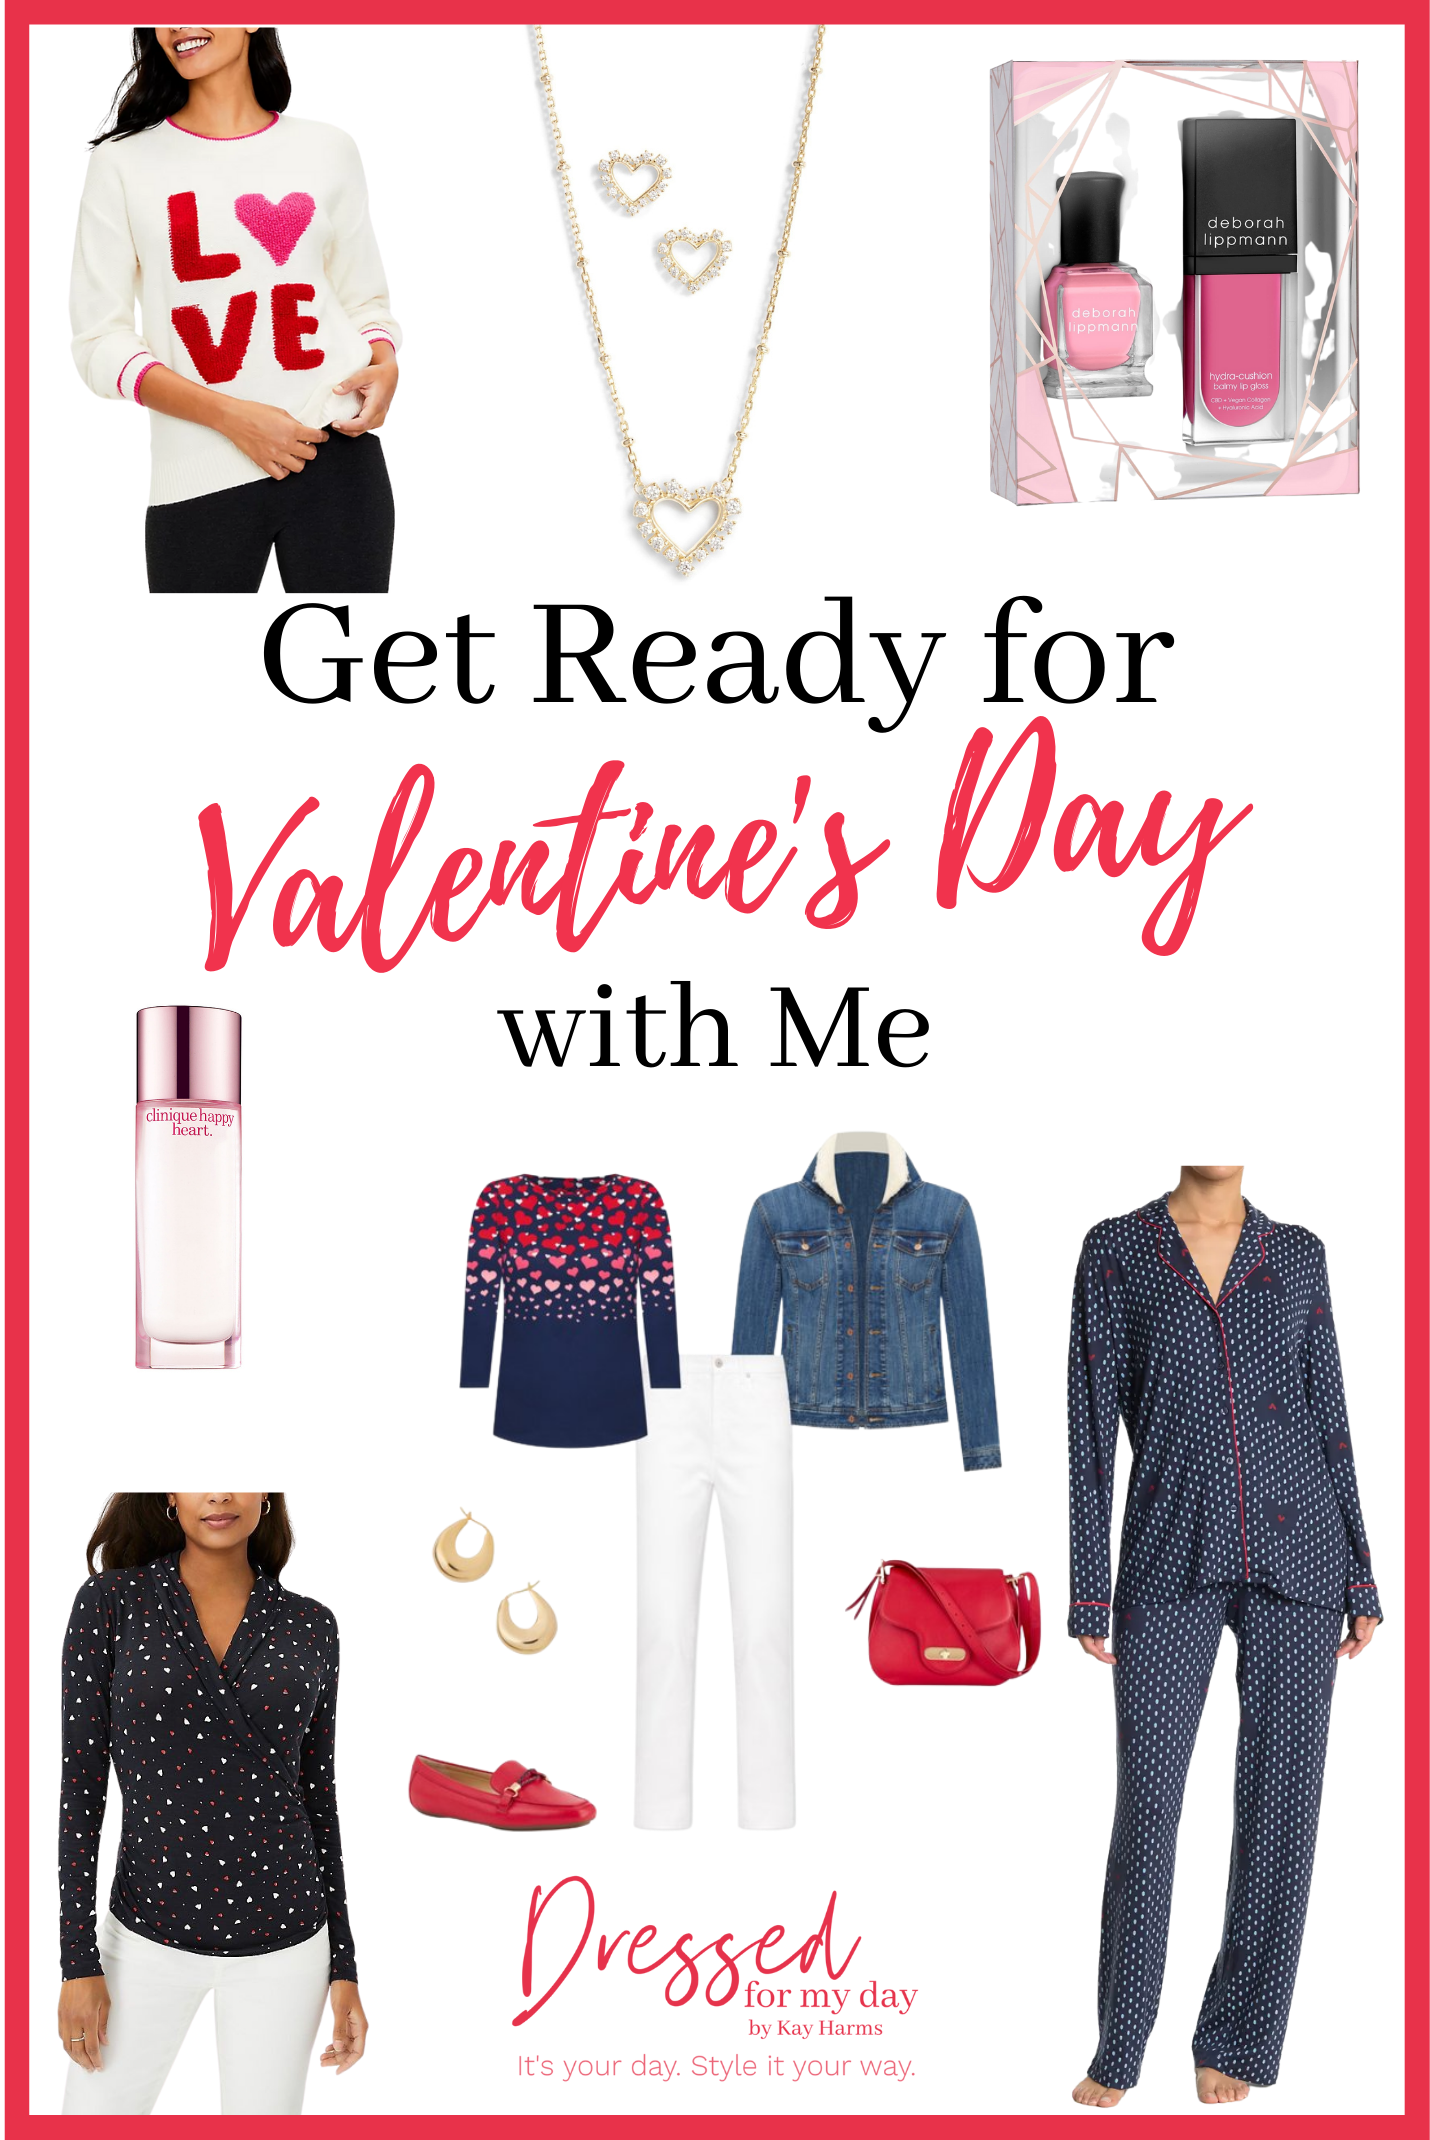 Get Ready for Valentine's Day with Me